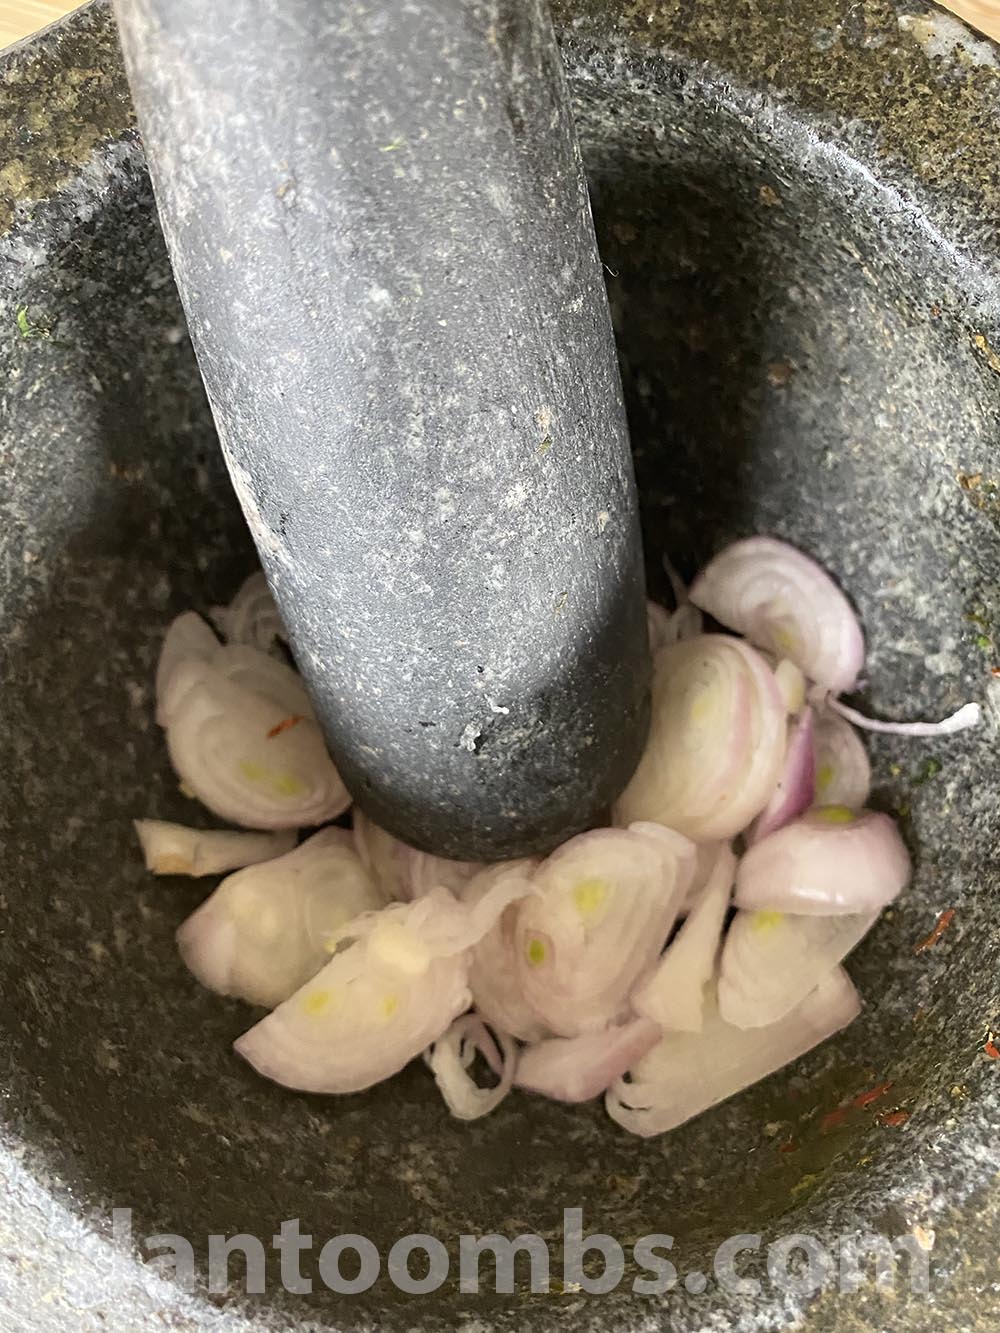 pounding shallots in mortar